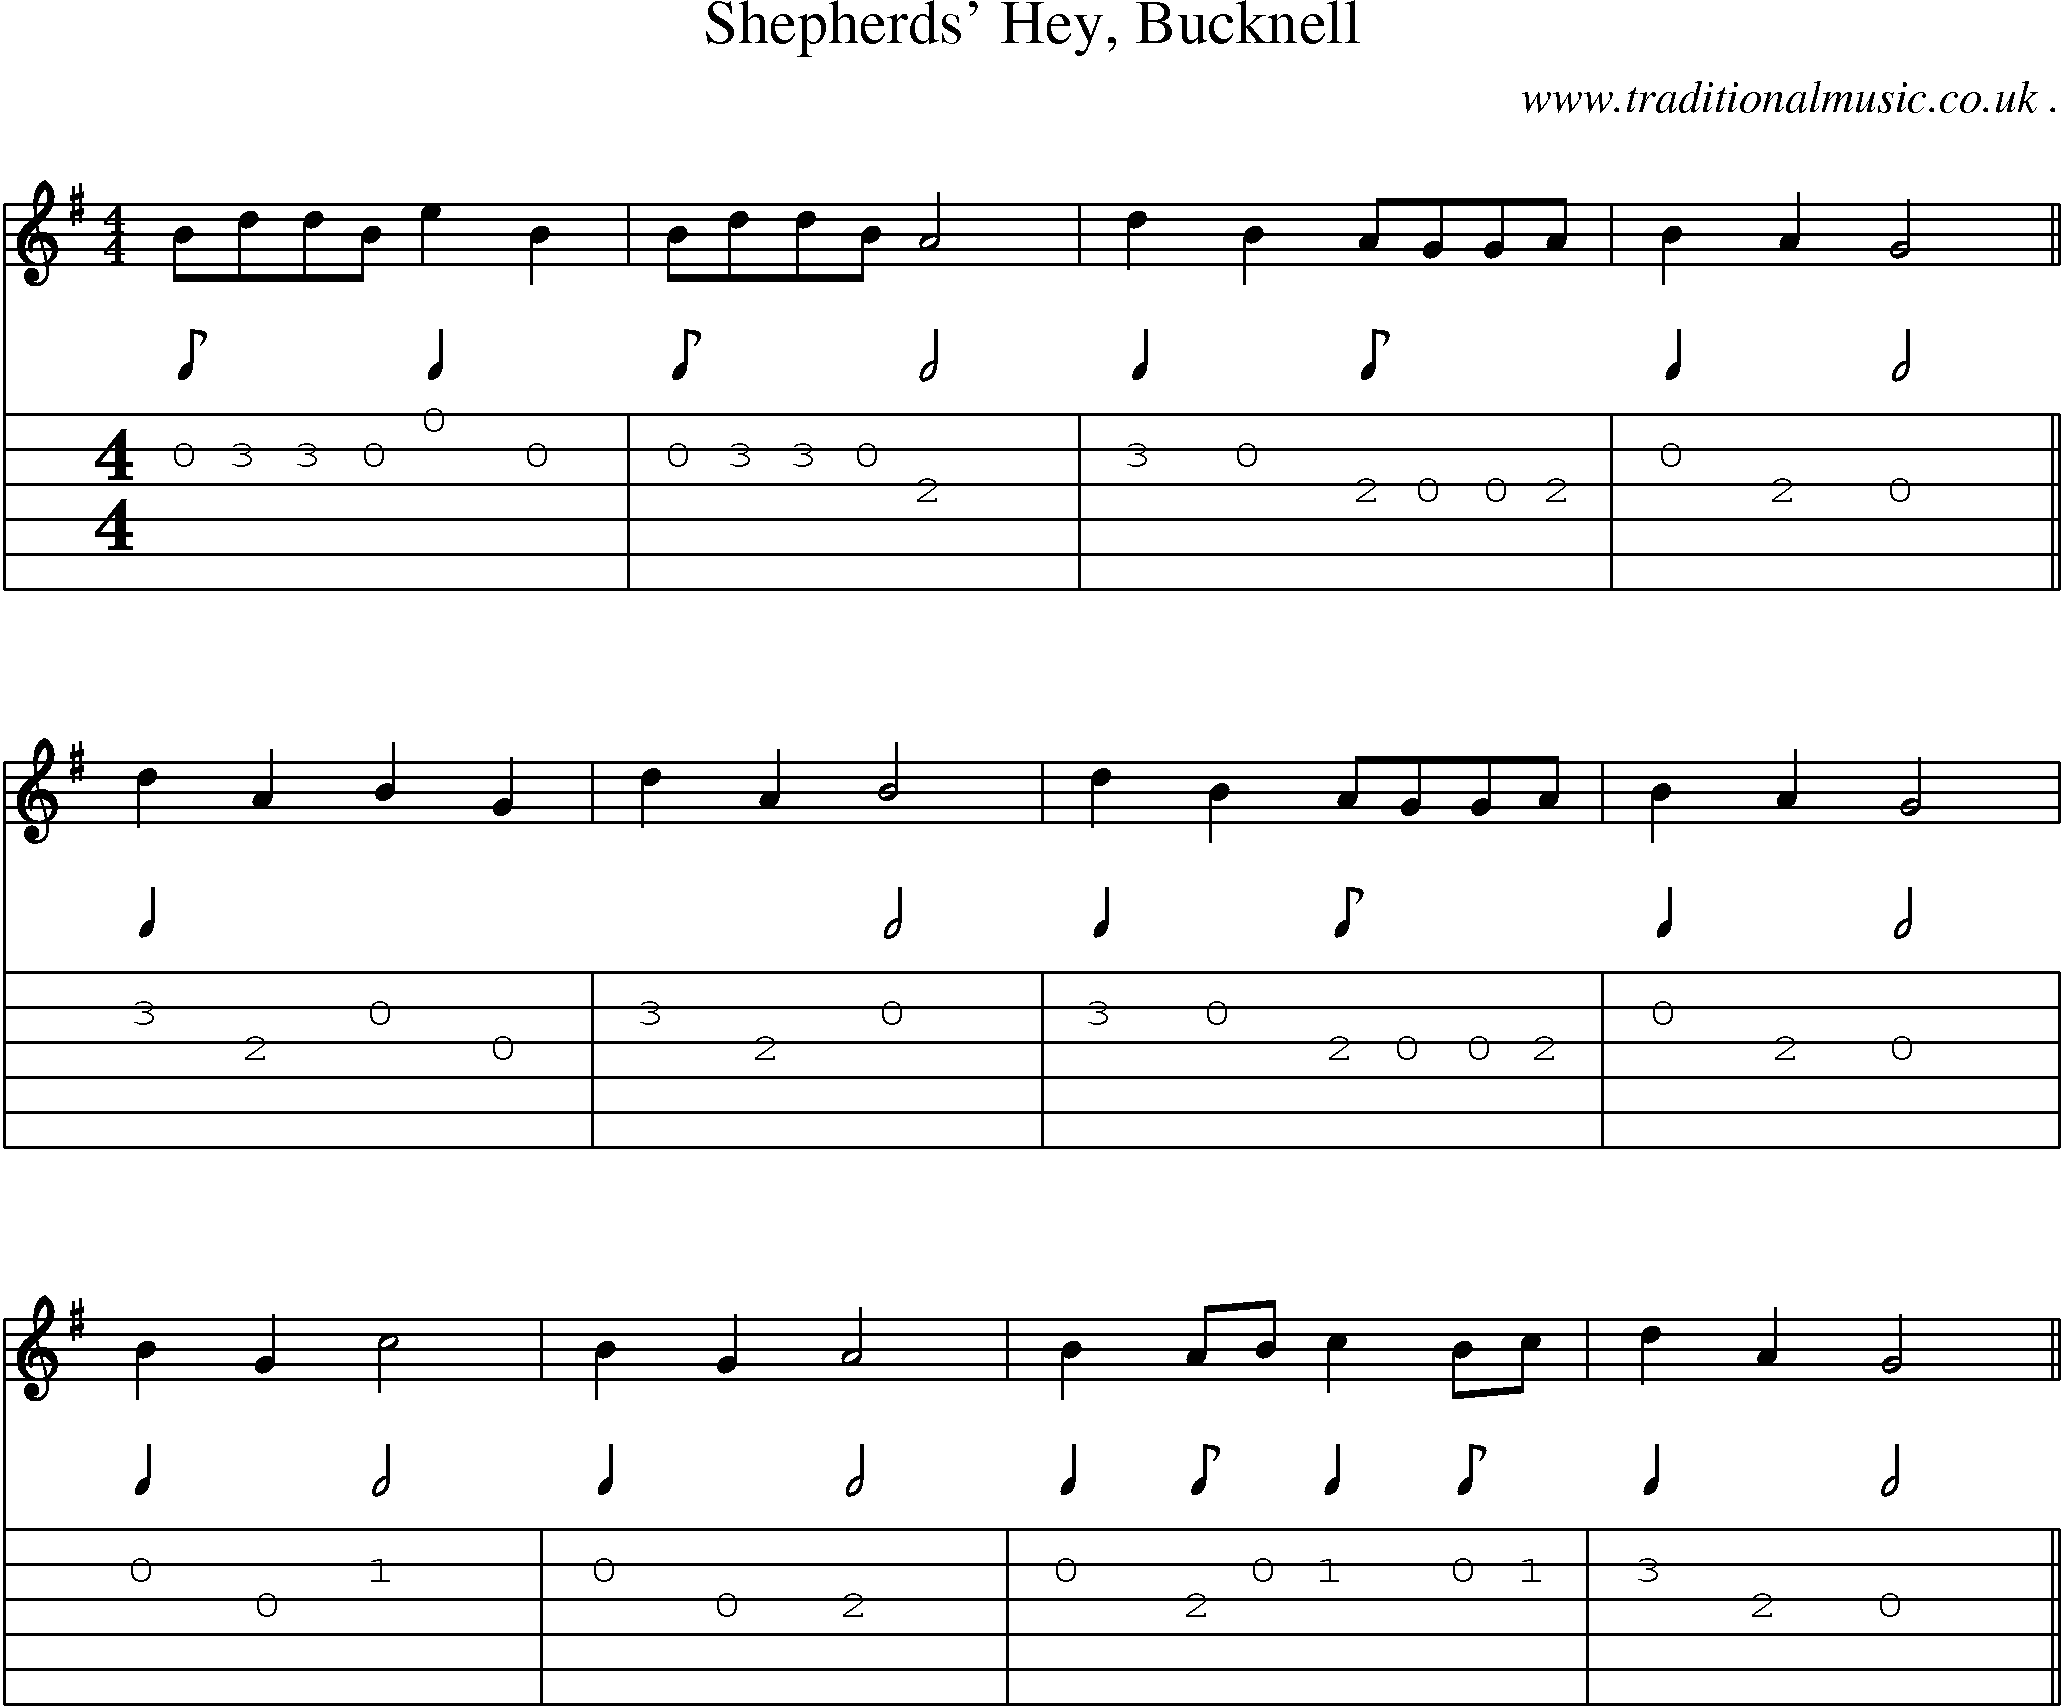 Sheet-Music and Guitar Tabs for Shepherds Hey Bucknell